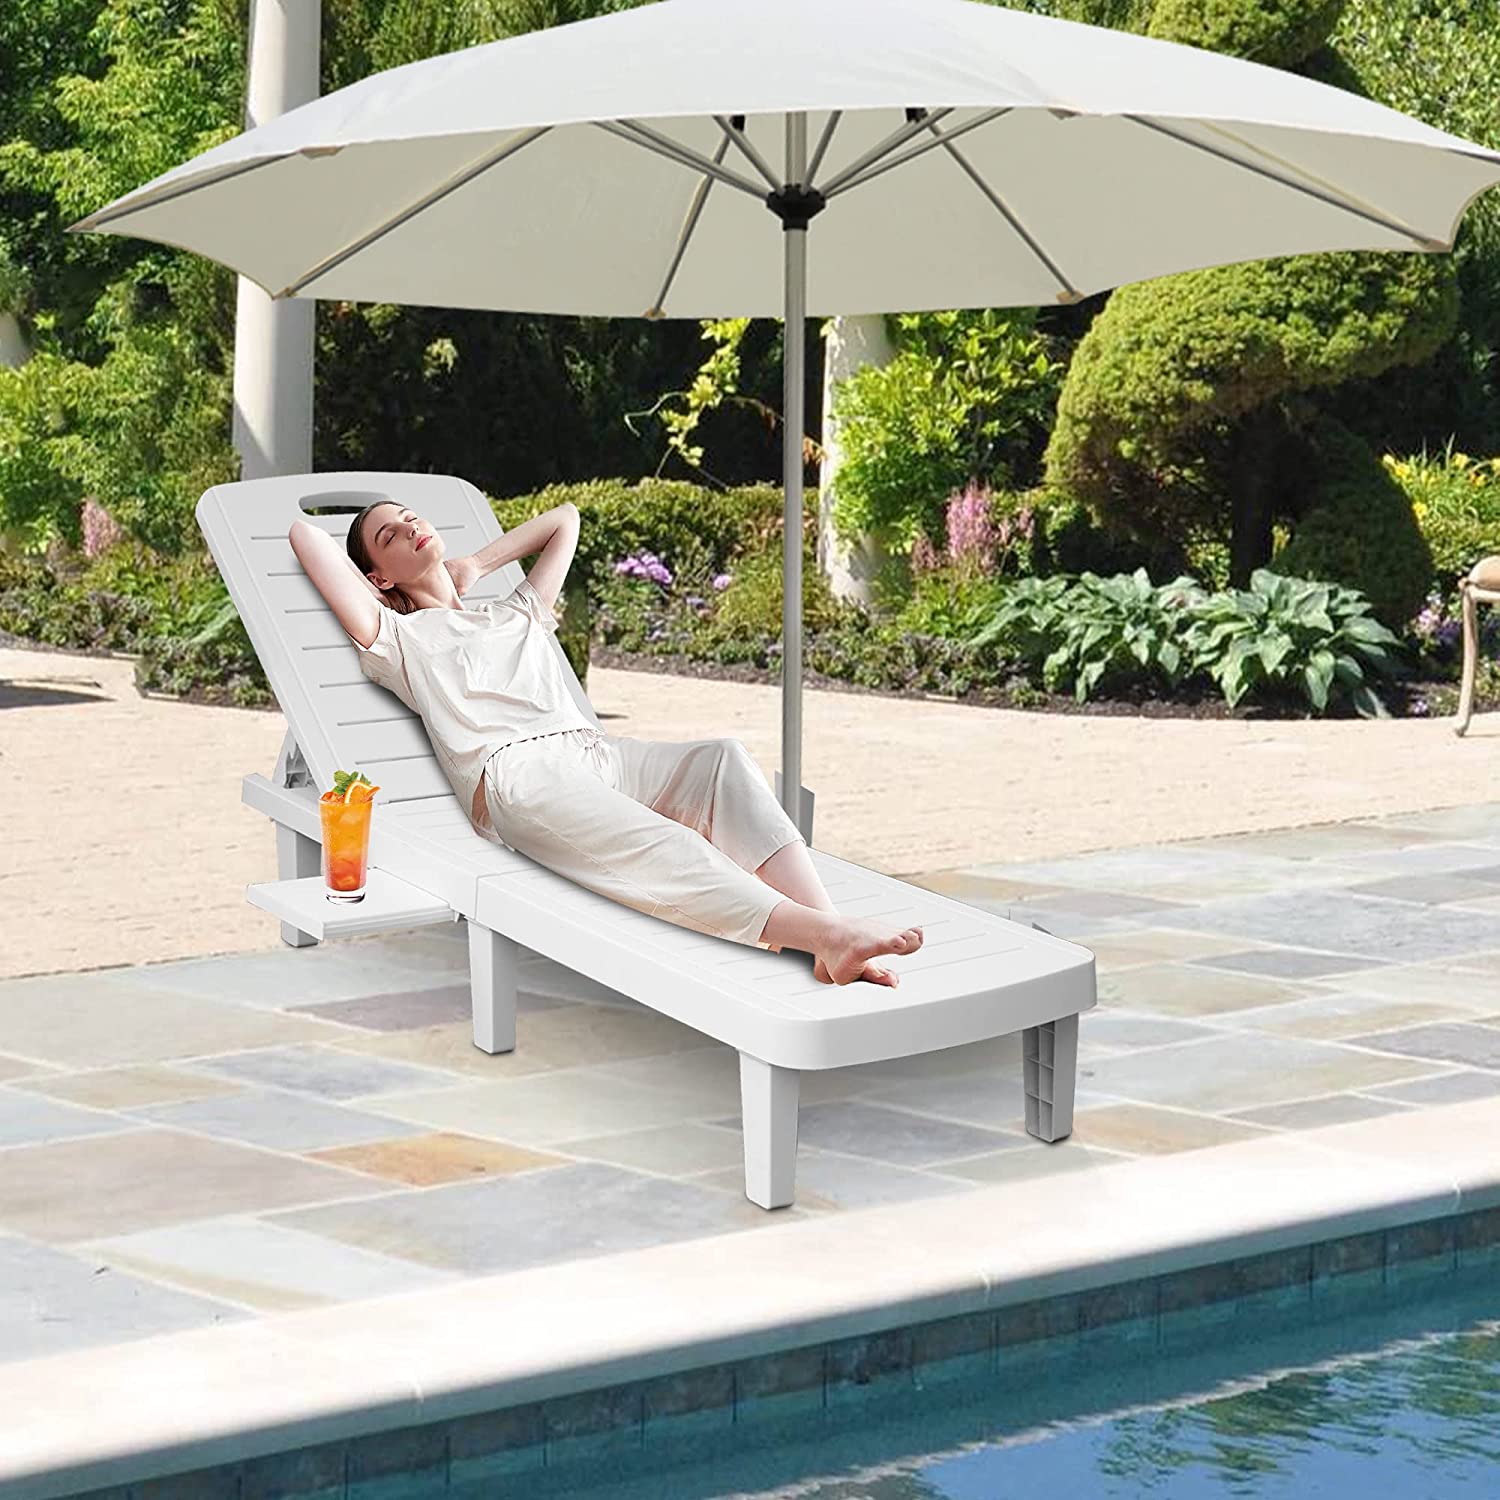 Chaise Lounge Chair Patio Sunbathing Chair with 4 Level Adjustable Backrest & Hide Cup Holder, White